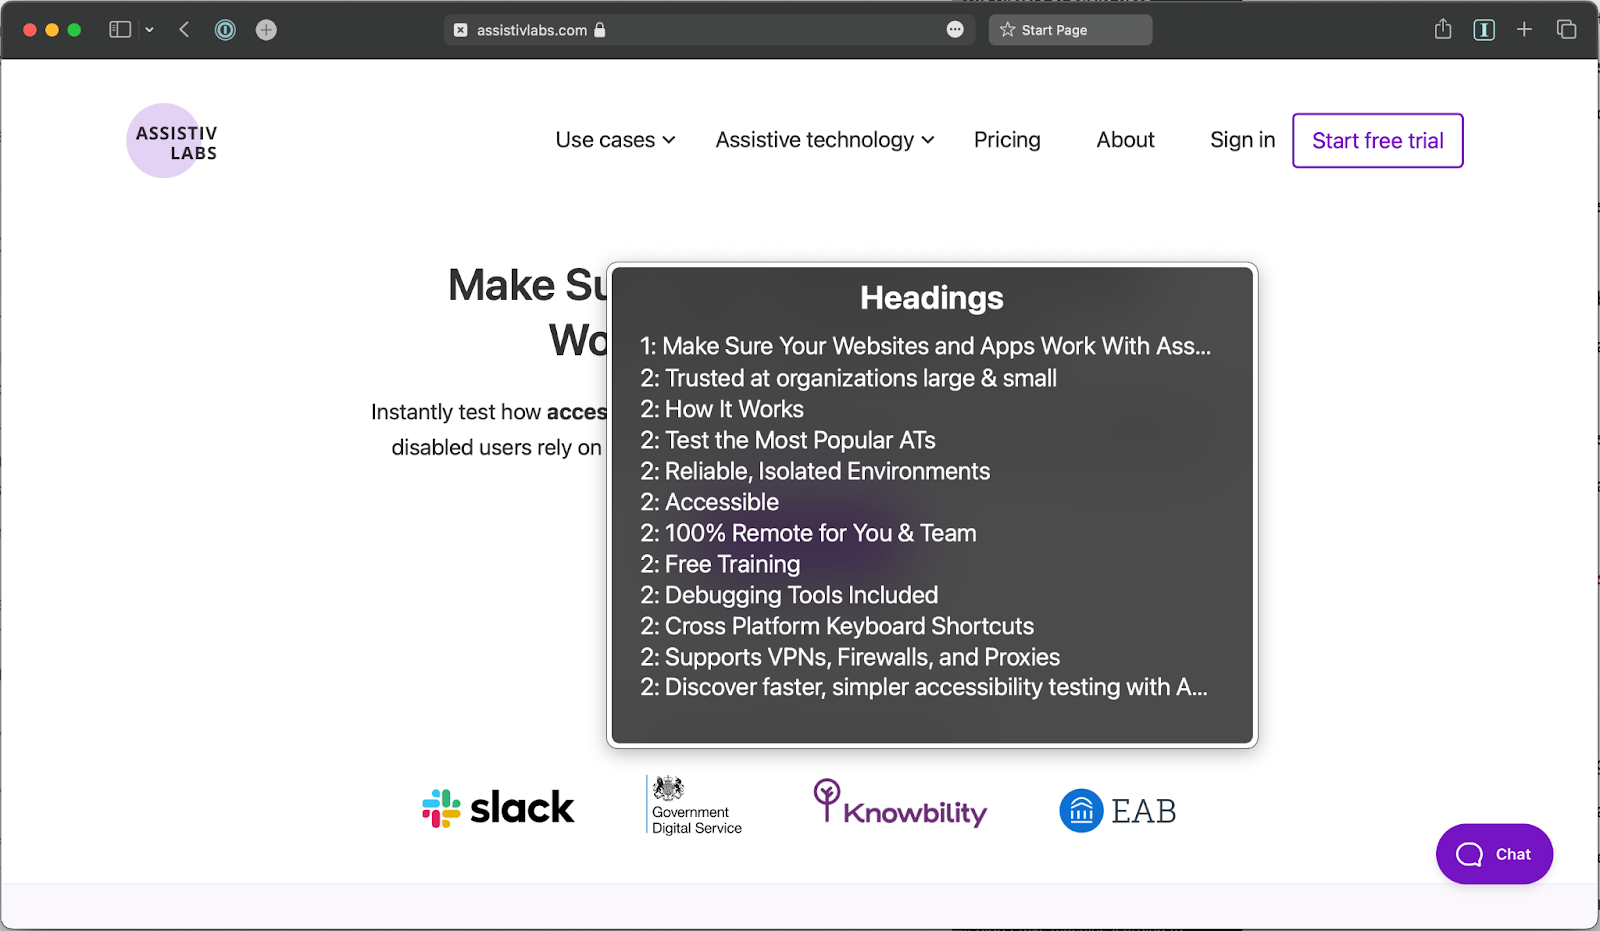 Assistiv Lab’s website open in Safari with a Voice Over dialog showing each of the headings on that page.